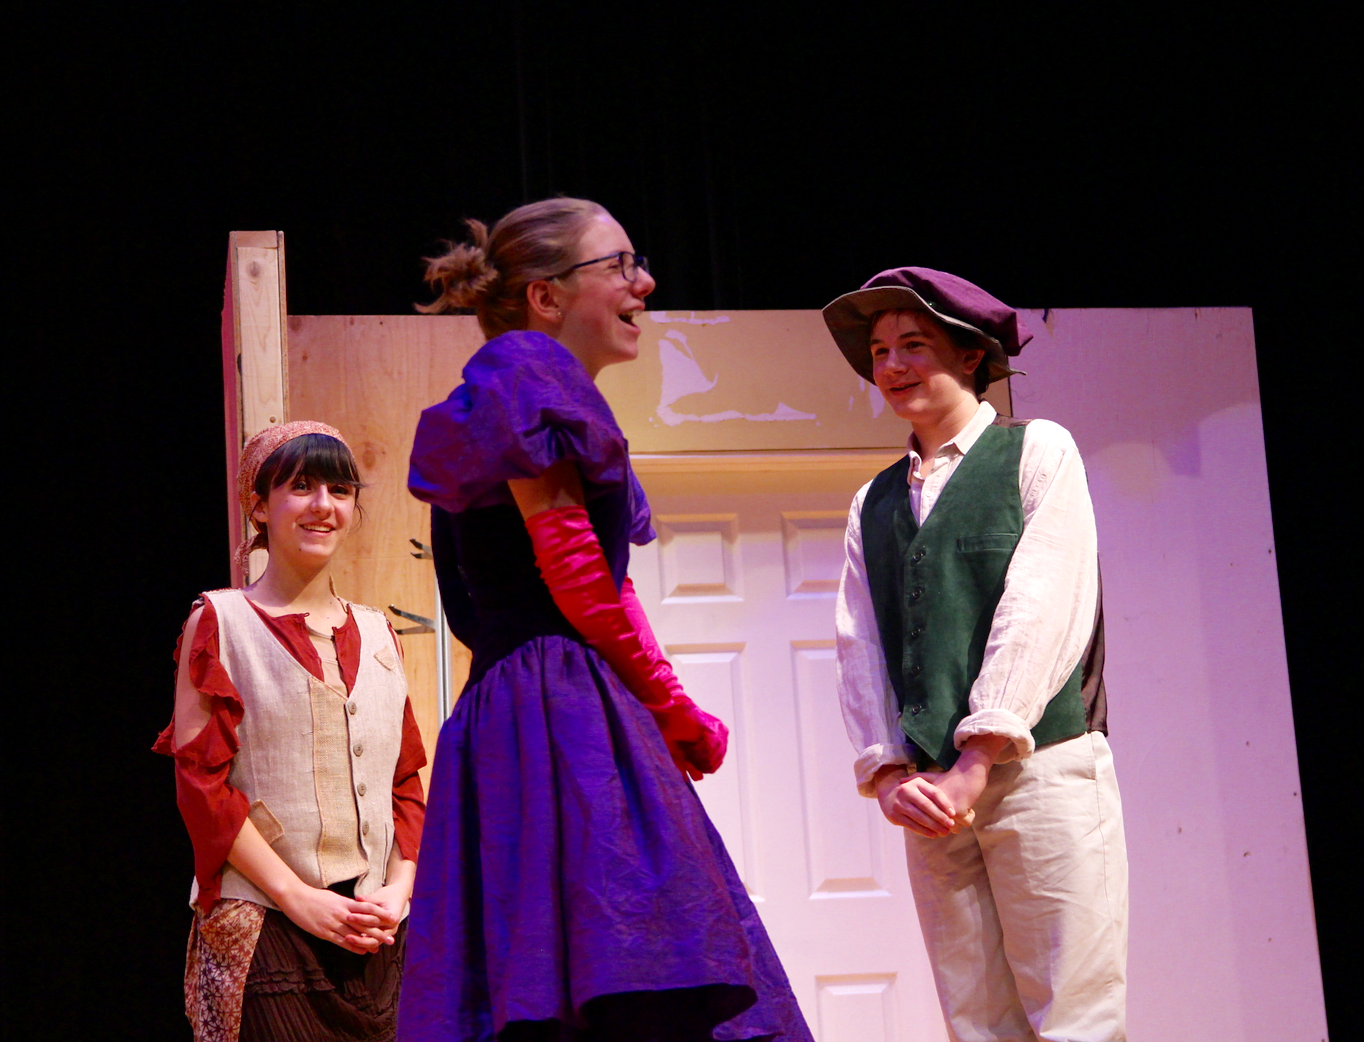 The Eastern Middle School 8th Grade Show Chorus held a dress rehearsal for their upcoming musical performance, “Cinderella." Jan 6, 2018 Photo: Leslie Yager